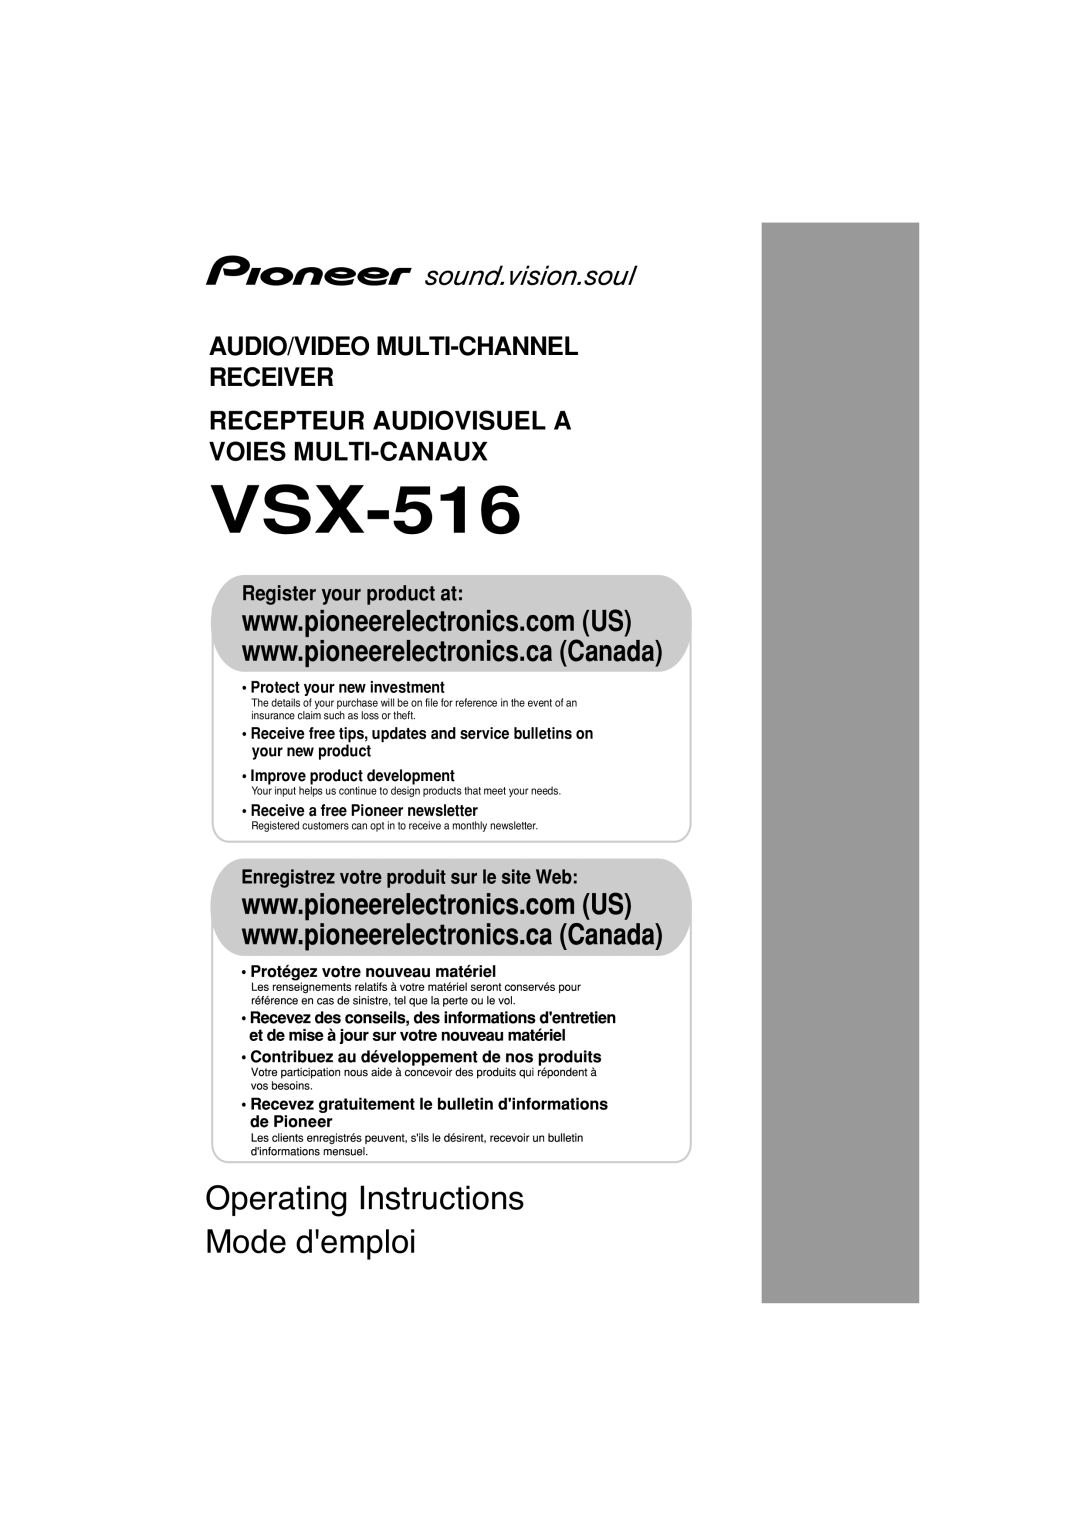 Pioneer VSX-516 operating instructions Operating Instructions Mode demploi, Audio/Video Multi-Channel Receiver 